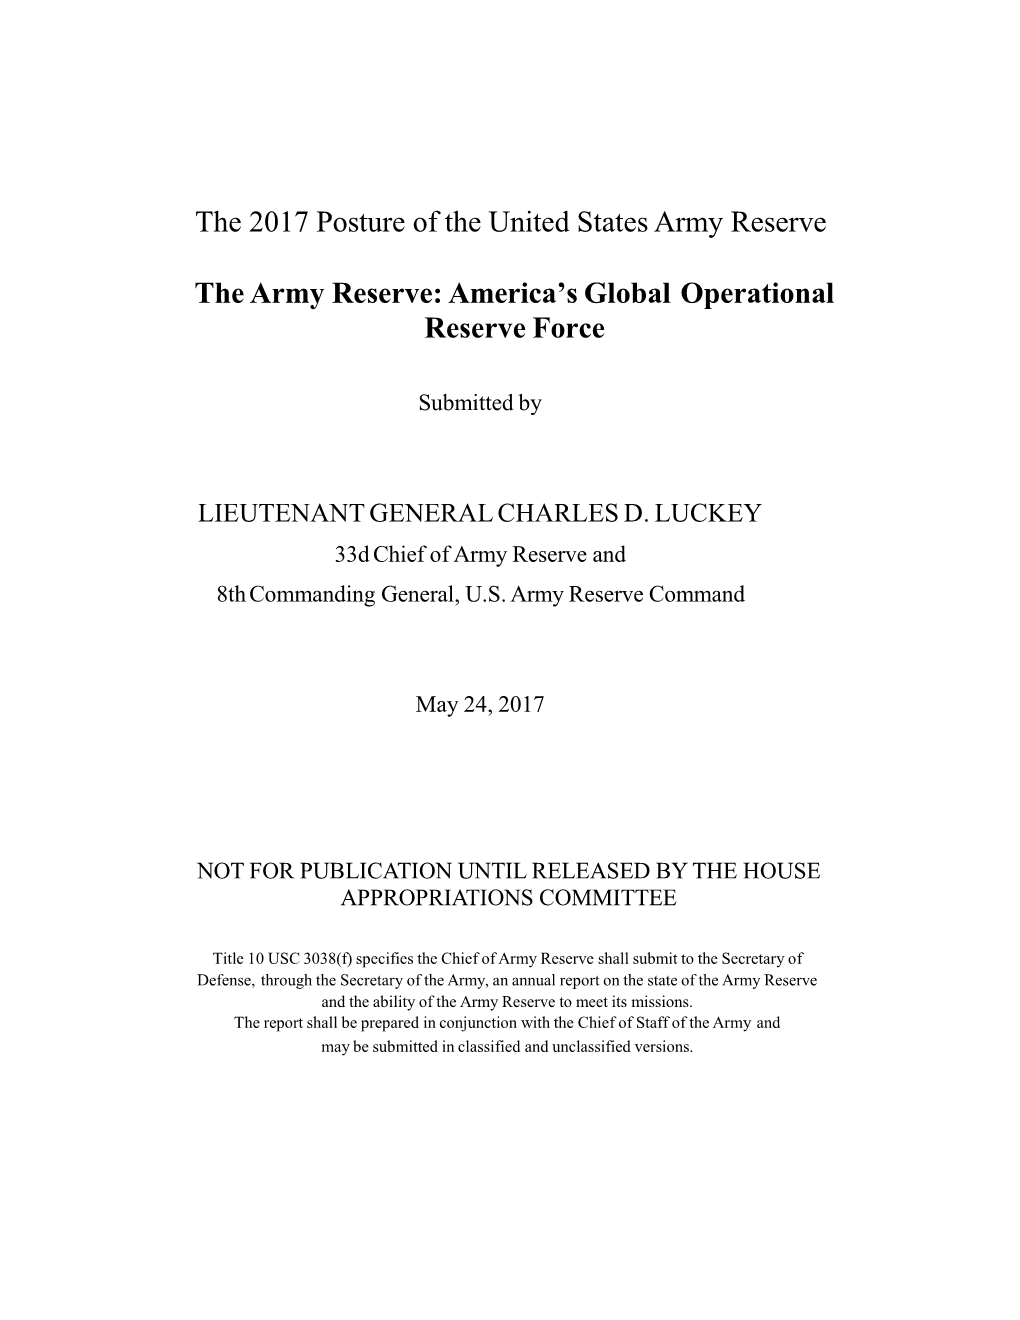 The 2017 Posture of the United States Army Reserve